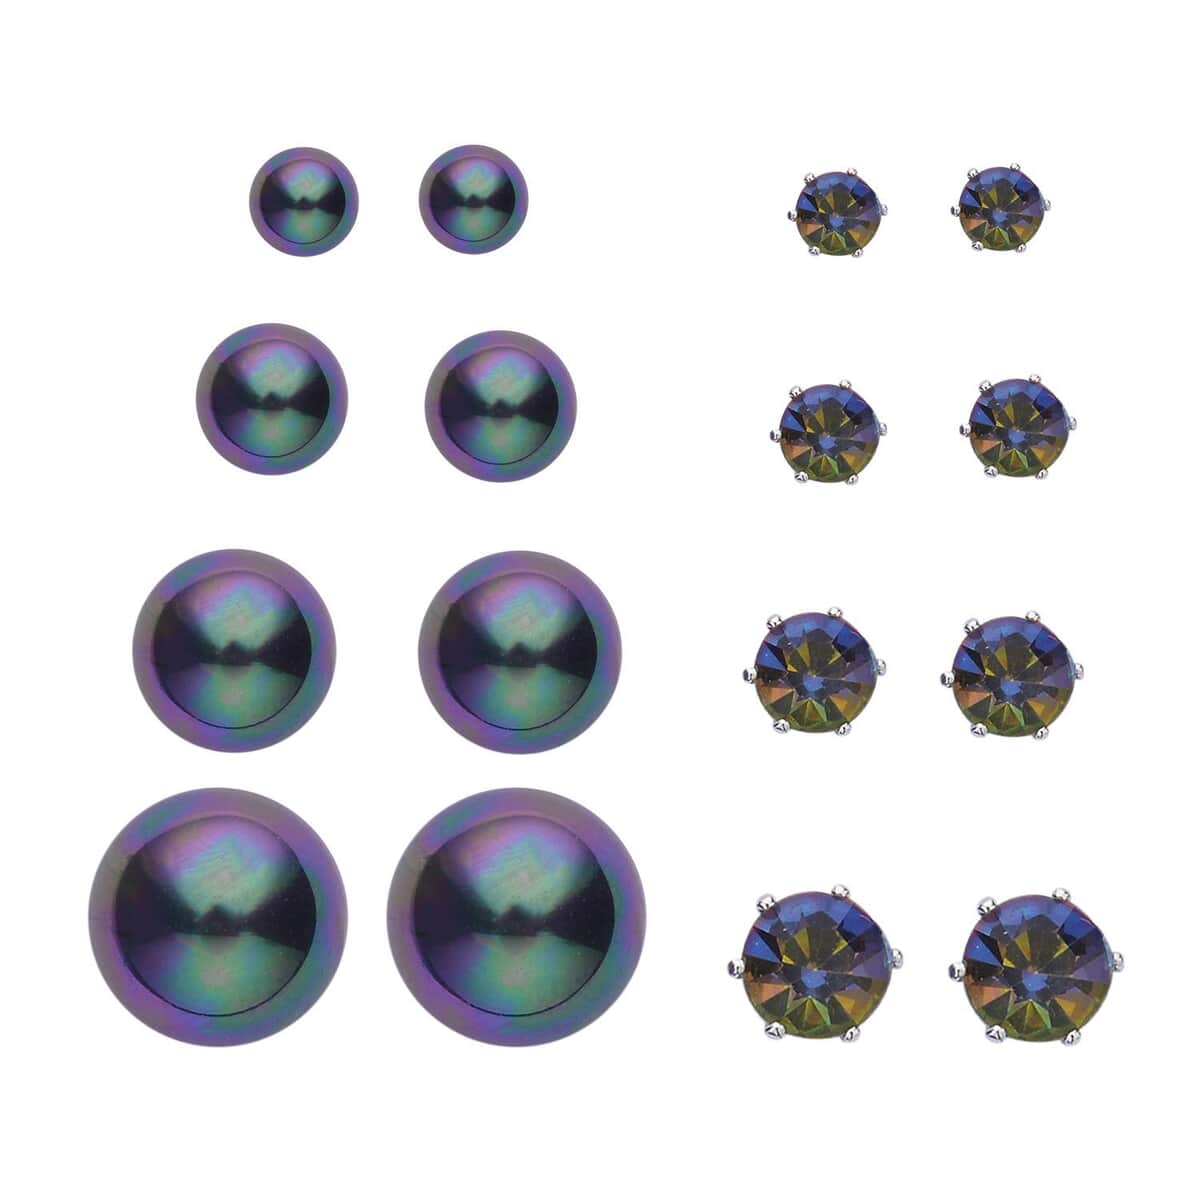 Doorbuster 9 Piece Set - 4pcs Peacock Color Shell Pearl Earrings, 4pcs Multi Color Austrian Crystal Earrings and 1pc Bracelet (7.5-9.5In) in Silvertone & Stainless Steel image number 3